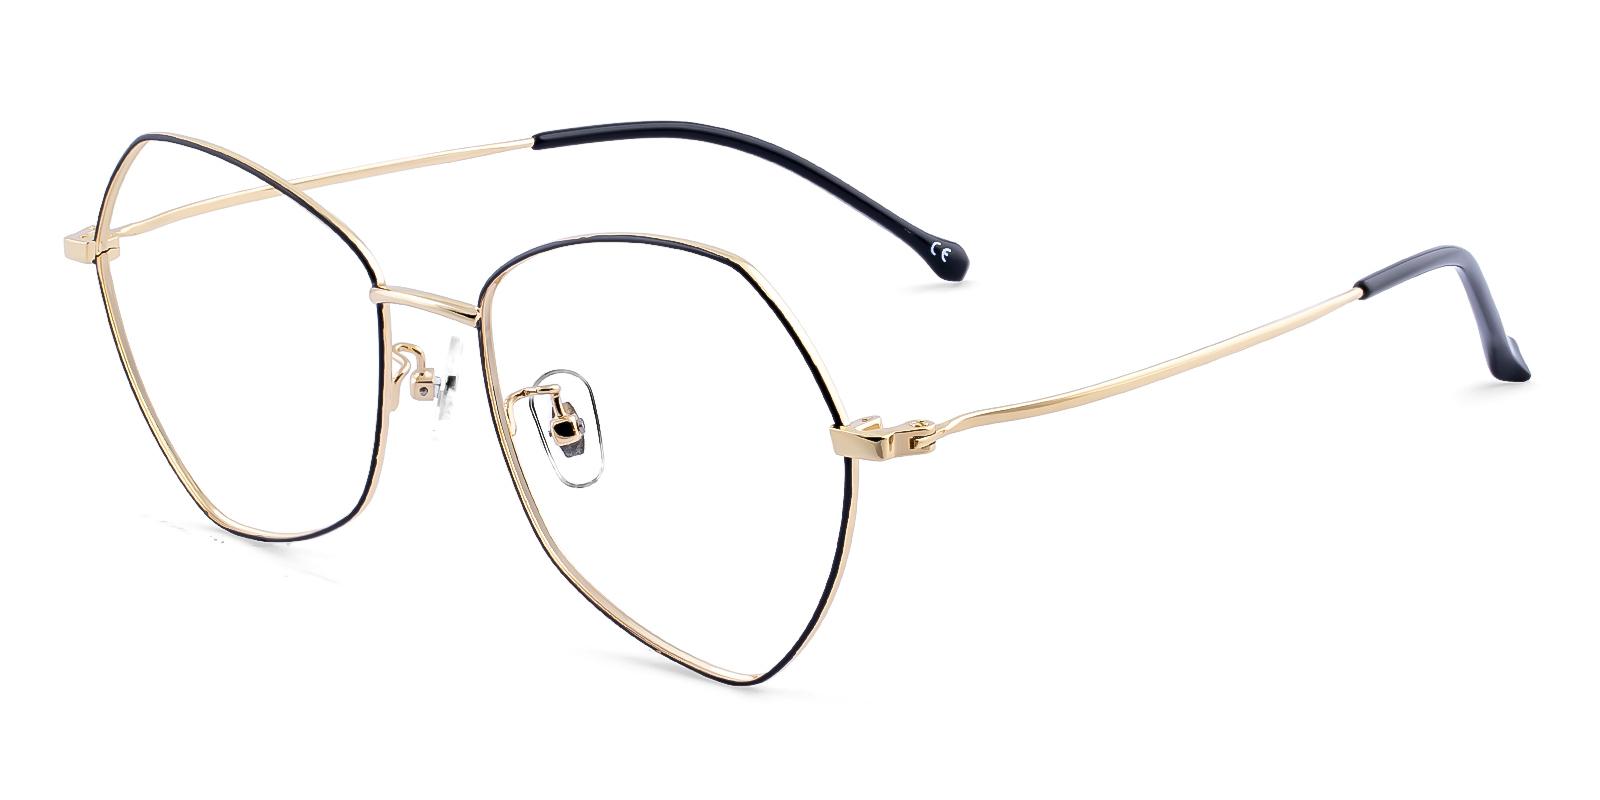 Thellet Gold Metal Eyeglasses , NosePads Frames from ABBE Glasses